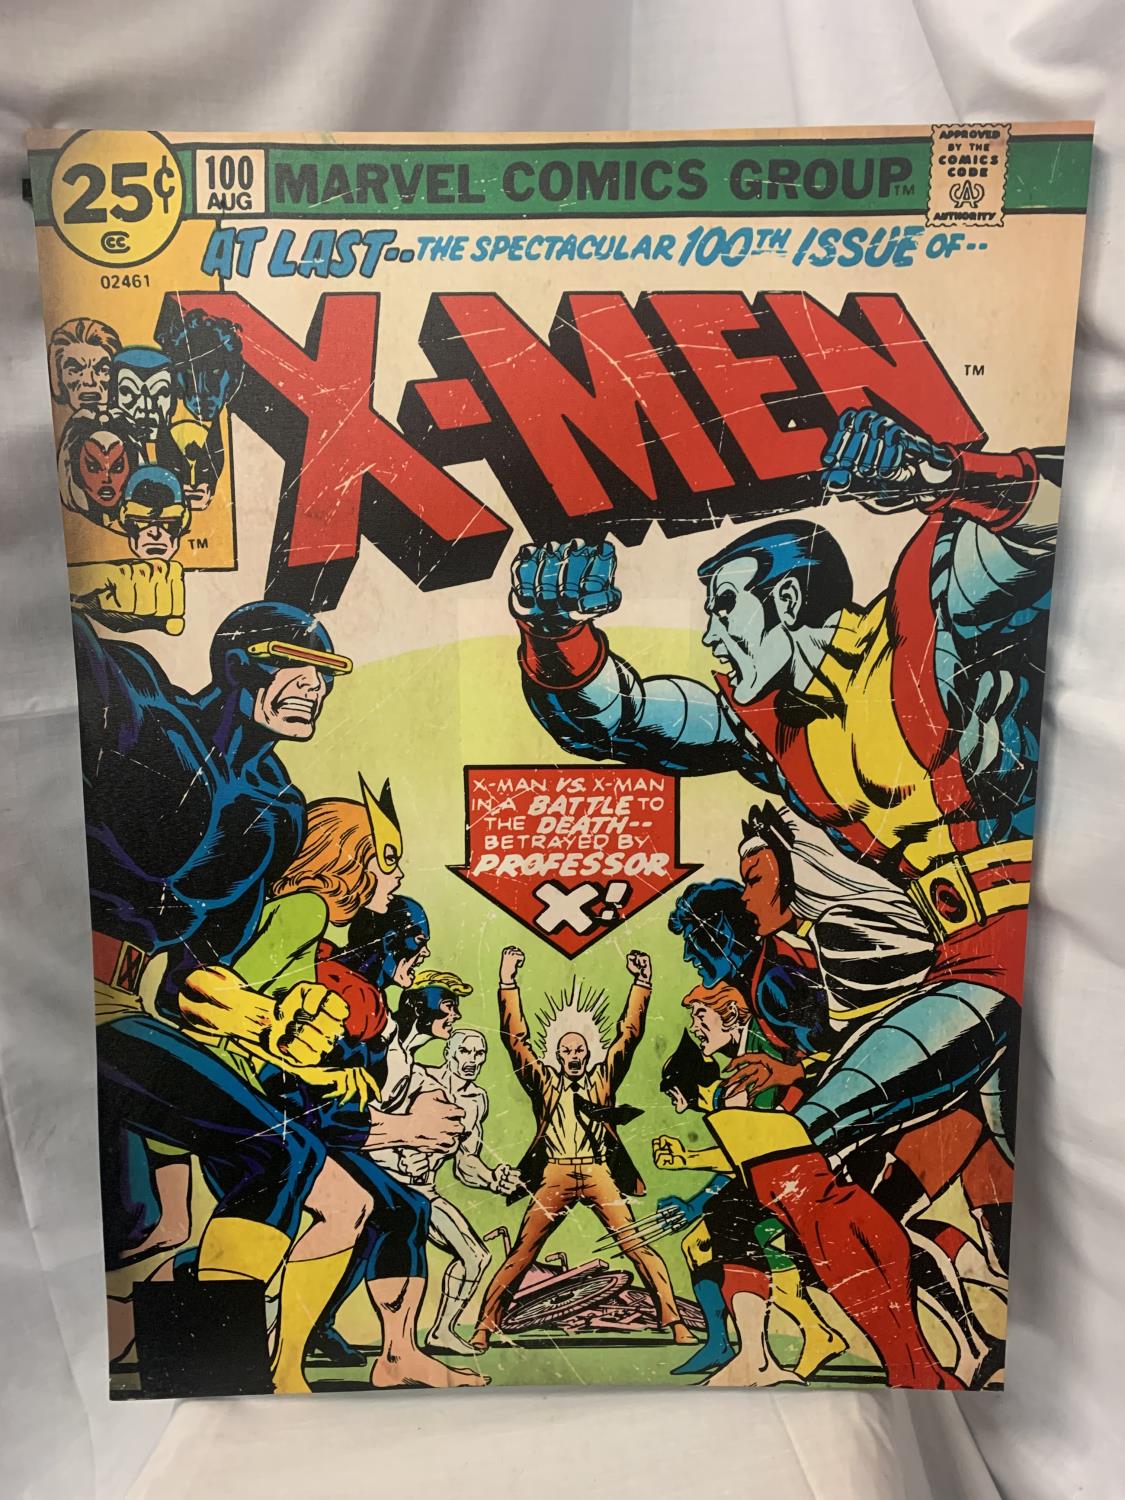 A LARGE XMEN COMIC STYLE CANVAS - Image 2 of 6